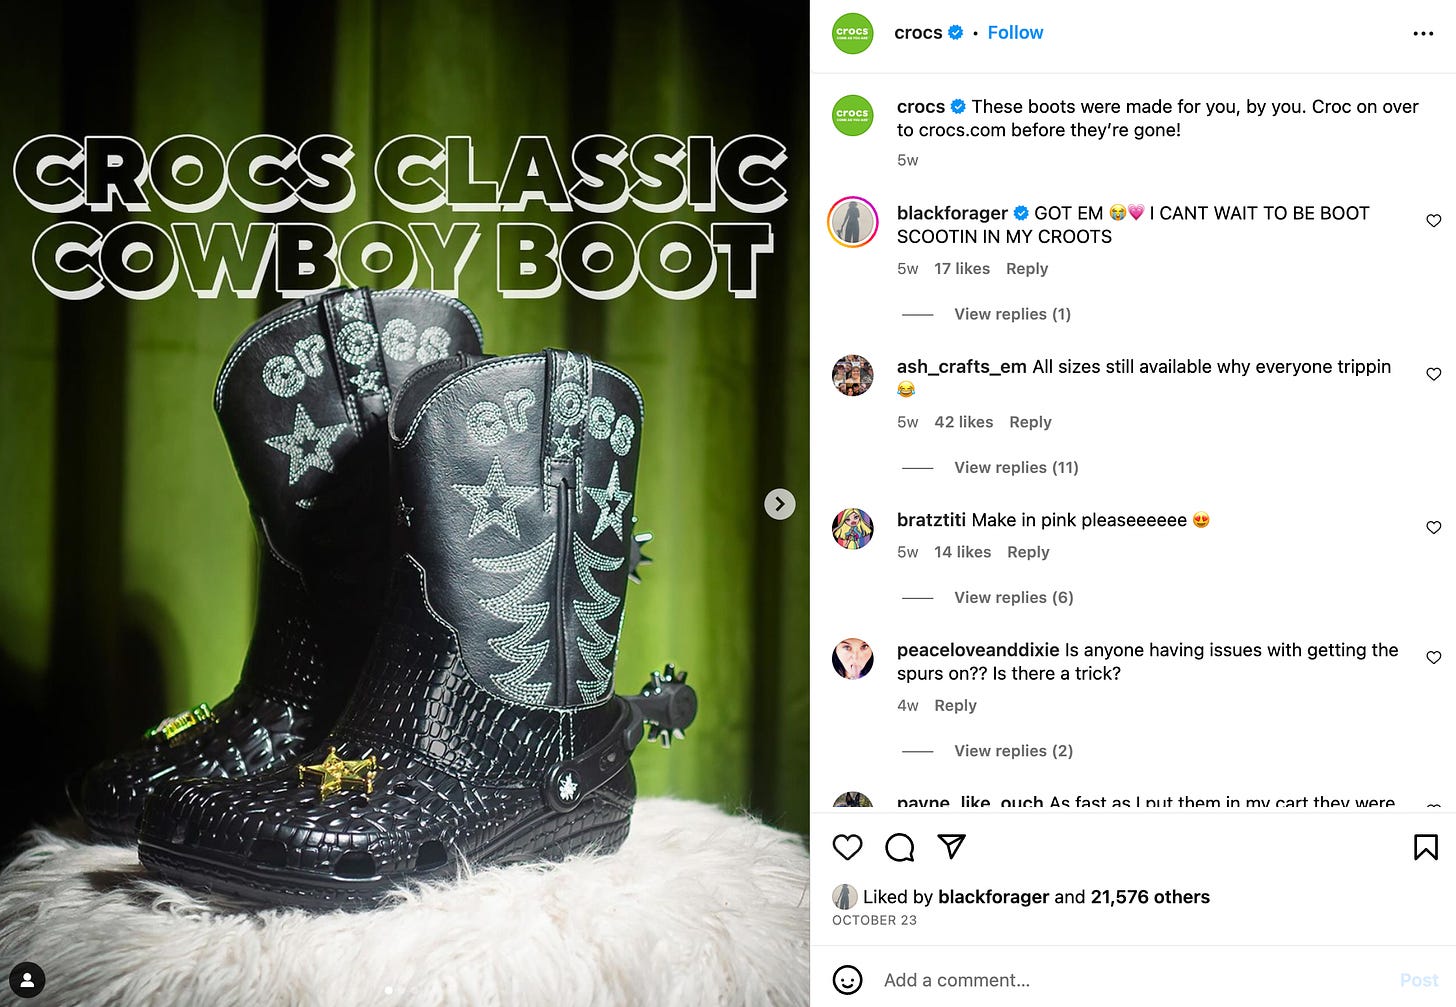 Photo of Crocs Classic Cowboy Boot sitting on a furry pillow in front of a green backdrop.